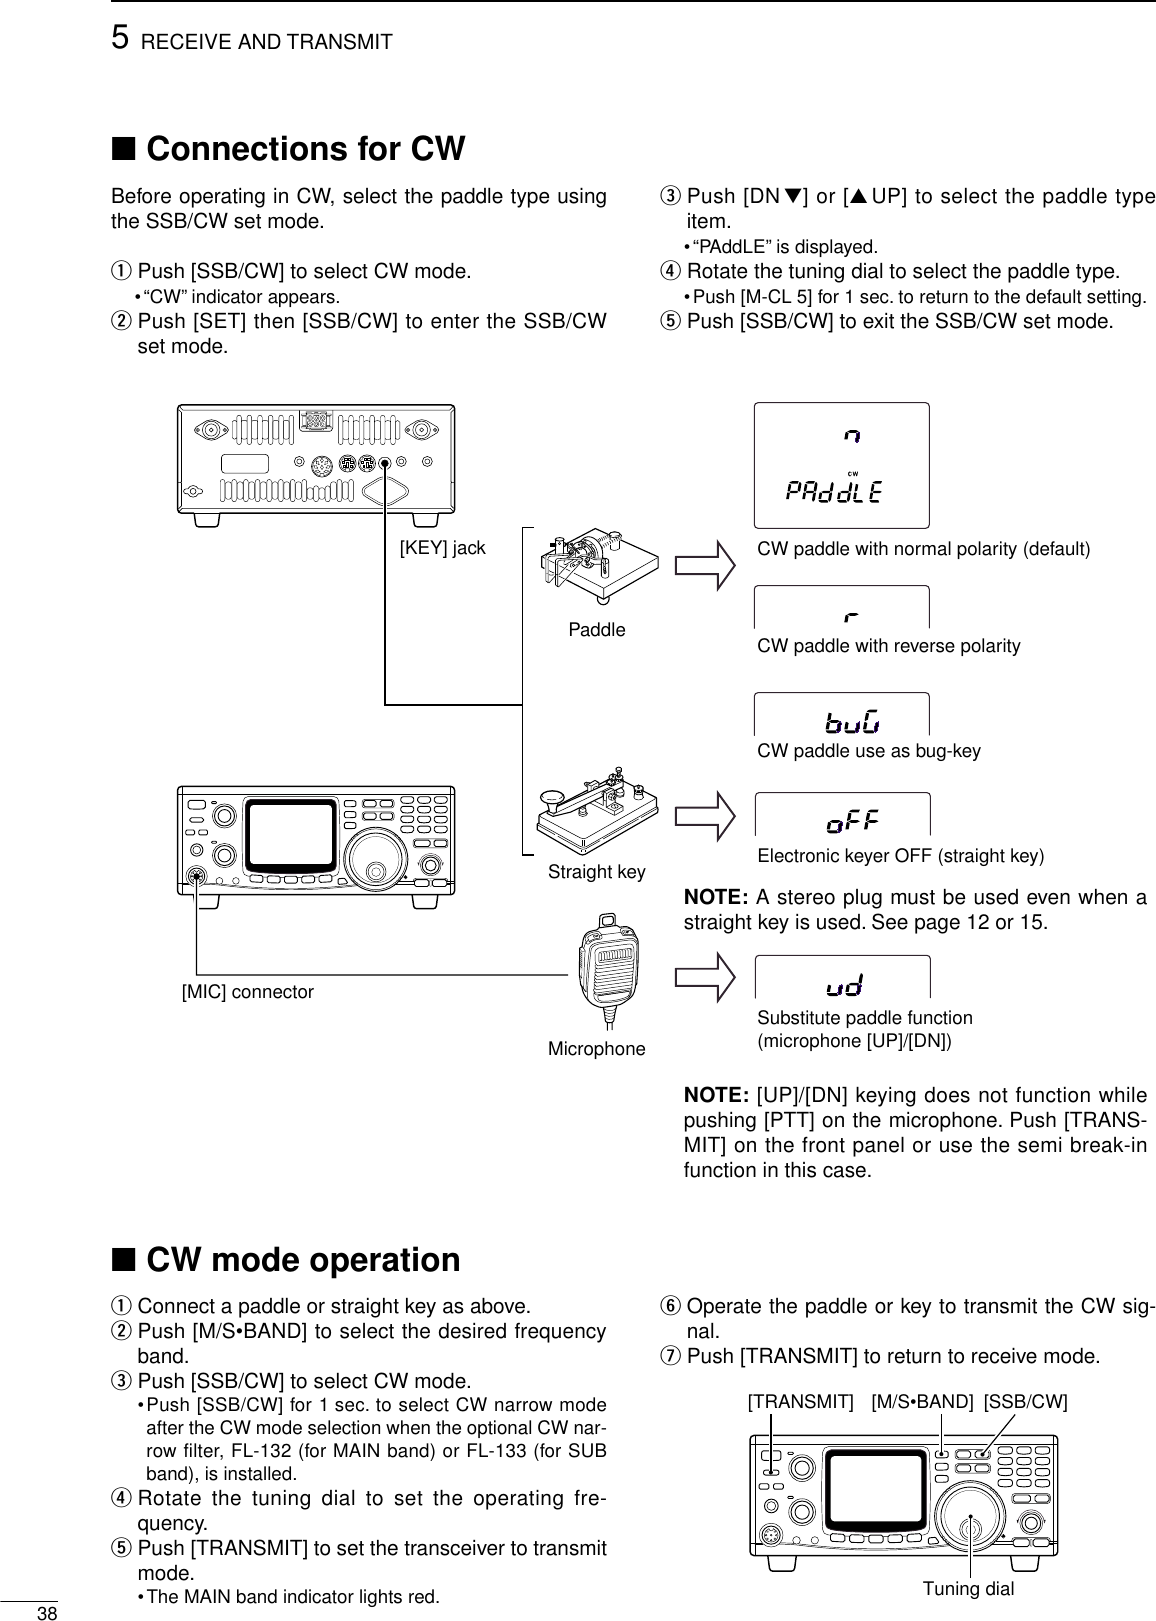 385RECEIVE AND TRANSMIT■Connections for CWBefore operating in CW, select the paddle type usingthe SSB/CW set mode.qPush [SSB/CW] to select CW mode.•“CW”indicator appears.wPush [SET] then [SSB/CW] to enter the SSB/CWset mode.ePush [DN▼] or [▲UP] to select the paddle typeitem.•“PAddLE”is displayed.rRotate the tuning dial to select the paddle type.•Push [M-CL 5] for 1 sec. to return to the default setting.tPush [SSB/CW] to exit the SSB/CW set mode.■CW mode operationqConnect a paddle or straight key as above.wPush [M/S•BAND] to select the desired frequencyband.ePush [SSB/CW] to select CW mode.•Push [SSB/CW] for 1 sec. to select CW narrow modeafter the CW mode selection when the optional CW nar-row filter, FL-132 (for MAIN band) or FL-133 (for SUBband), is installed.rRotate the tuning dial to set the operating fre-quency.tPush [TRANSMIT] to set the transceiver to transmitmode.•The MAIN band indicator lights red.yOperate the paddle or key to transmit the CW sig-nal.uPush [TRANSMIT] to return to receive mode.Tuning dial[SSB/CW][M/S•BAND][TRANSMIT]CWPaddleStraight keyMicrophone[KEY] jack[MIC] connectorCW paddle with normal polarity (default)CW paddle with reverse polarityCW paddle use as bug-keyElectronic keyer OFF (straight key)Substitute paddle function(microphone [UP]/[DN])NOTE: A stereo plug must be used even when astraight key is used. See page 12 or 15.NOTE: [UP]/[DN] keying does not function whilepushing [PTT] on the microphone. Push [TRANS-MIT] on the front panel or use the semi break-infunction in this case.